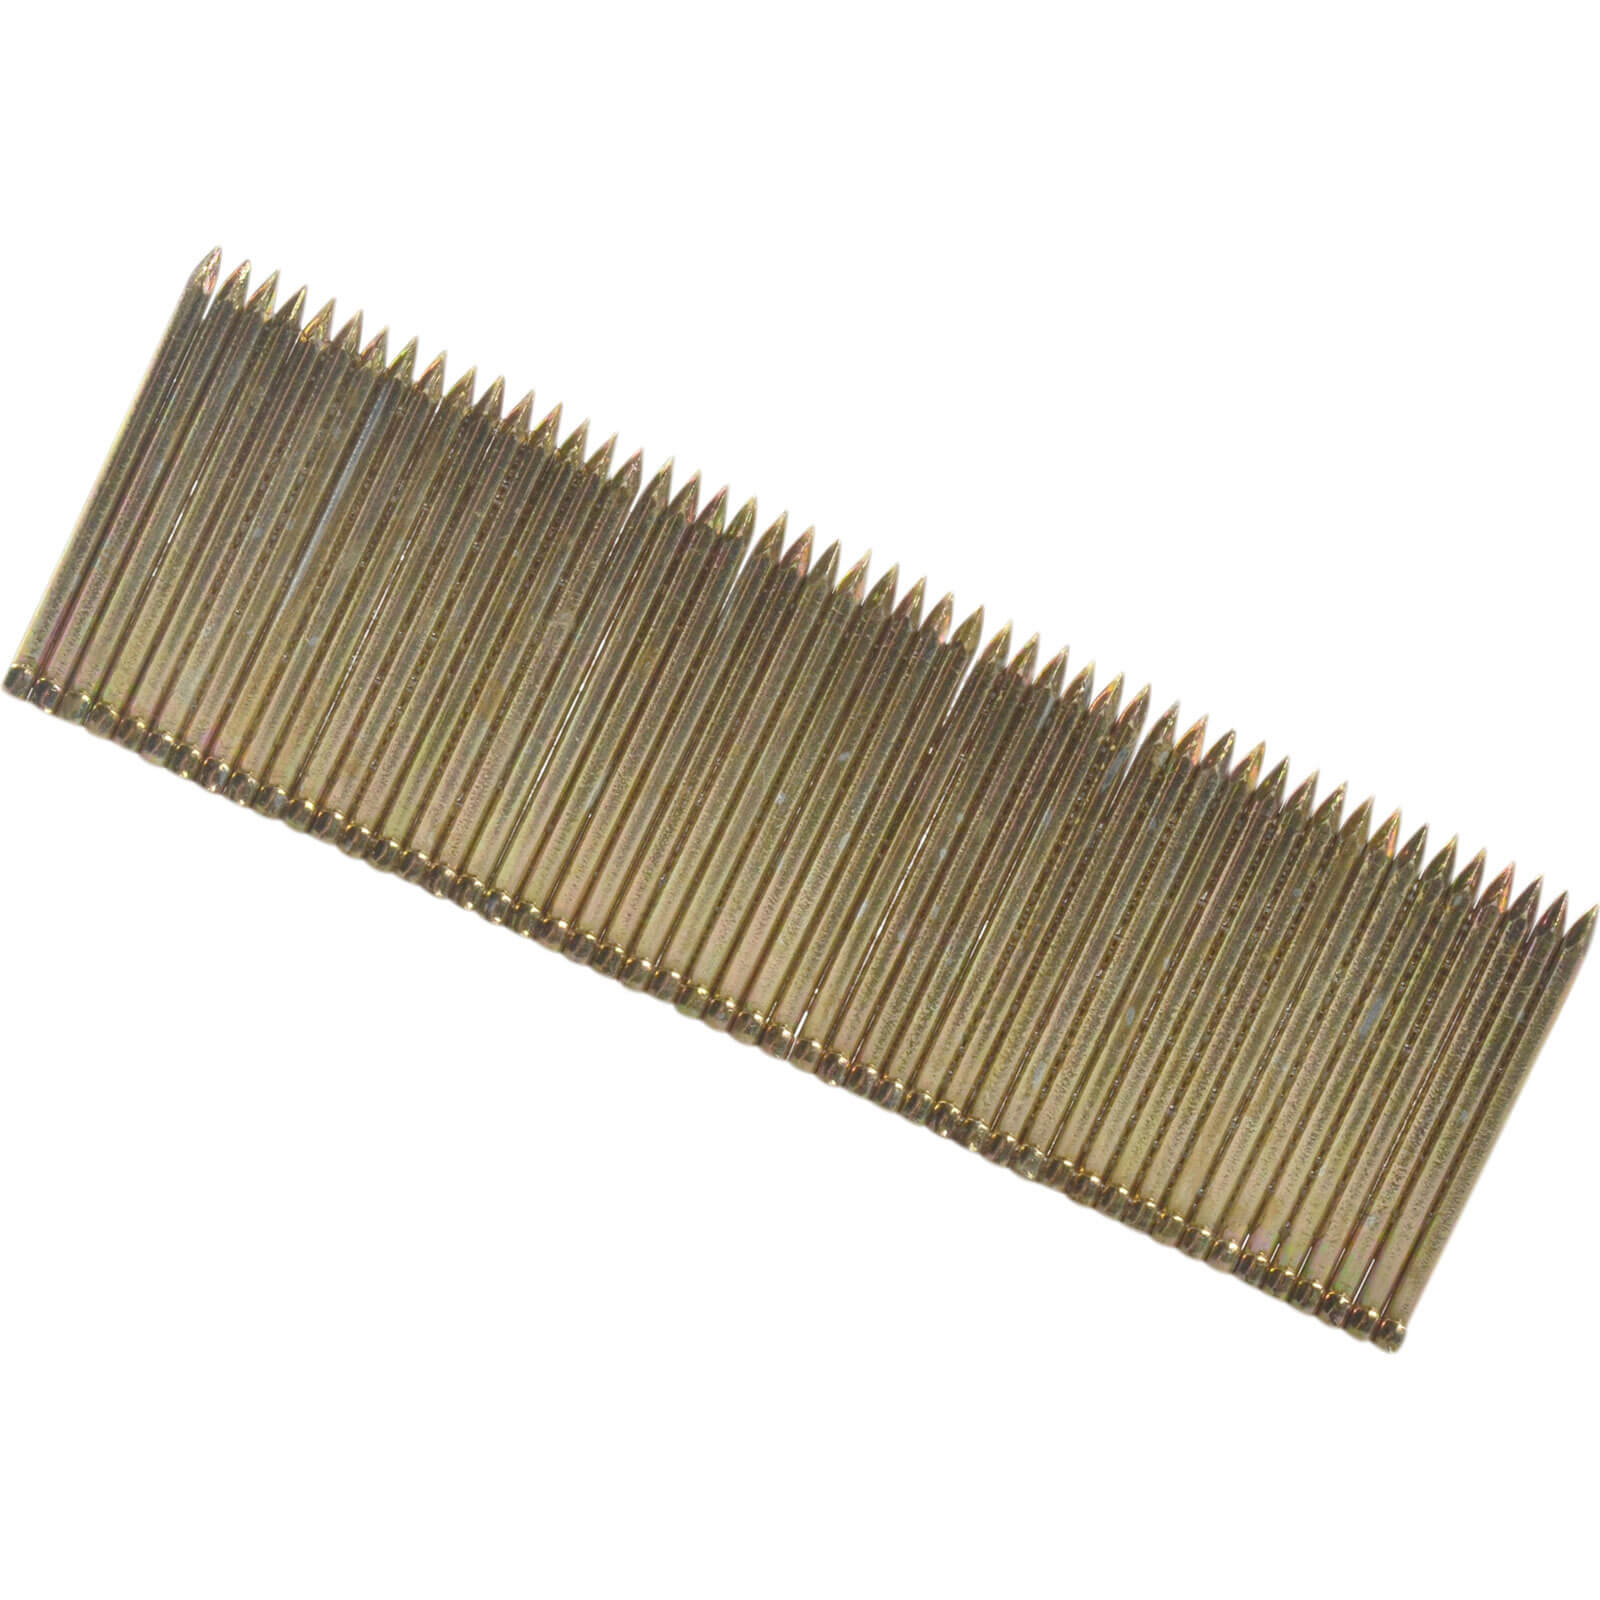 Image of Bostitch 15G Hardened Nails 30mm Pack of 1500